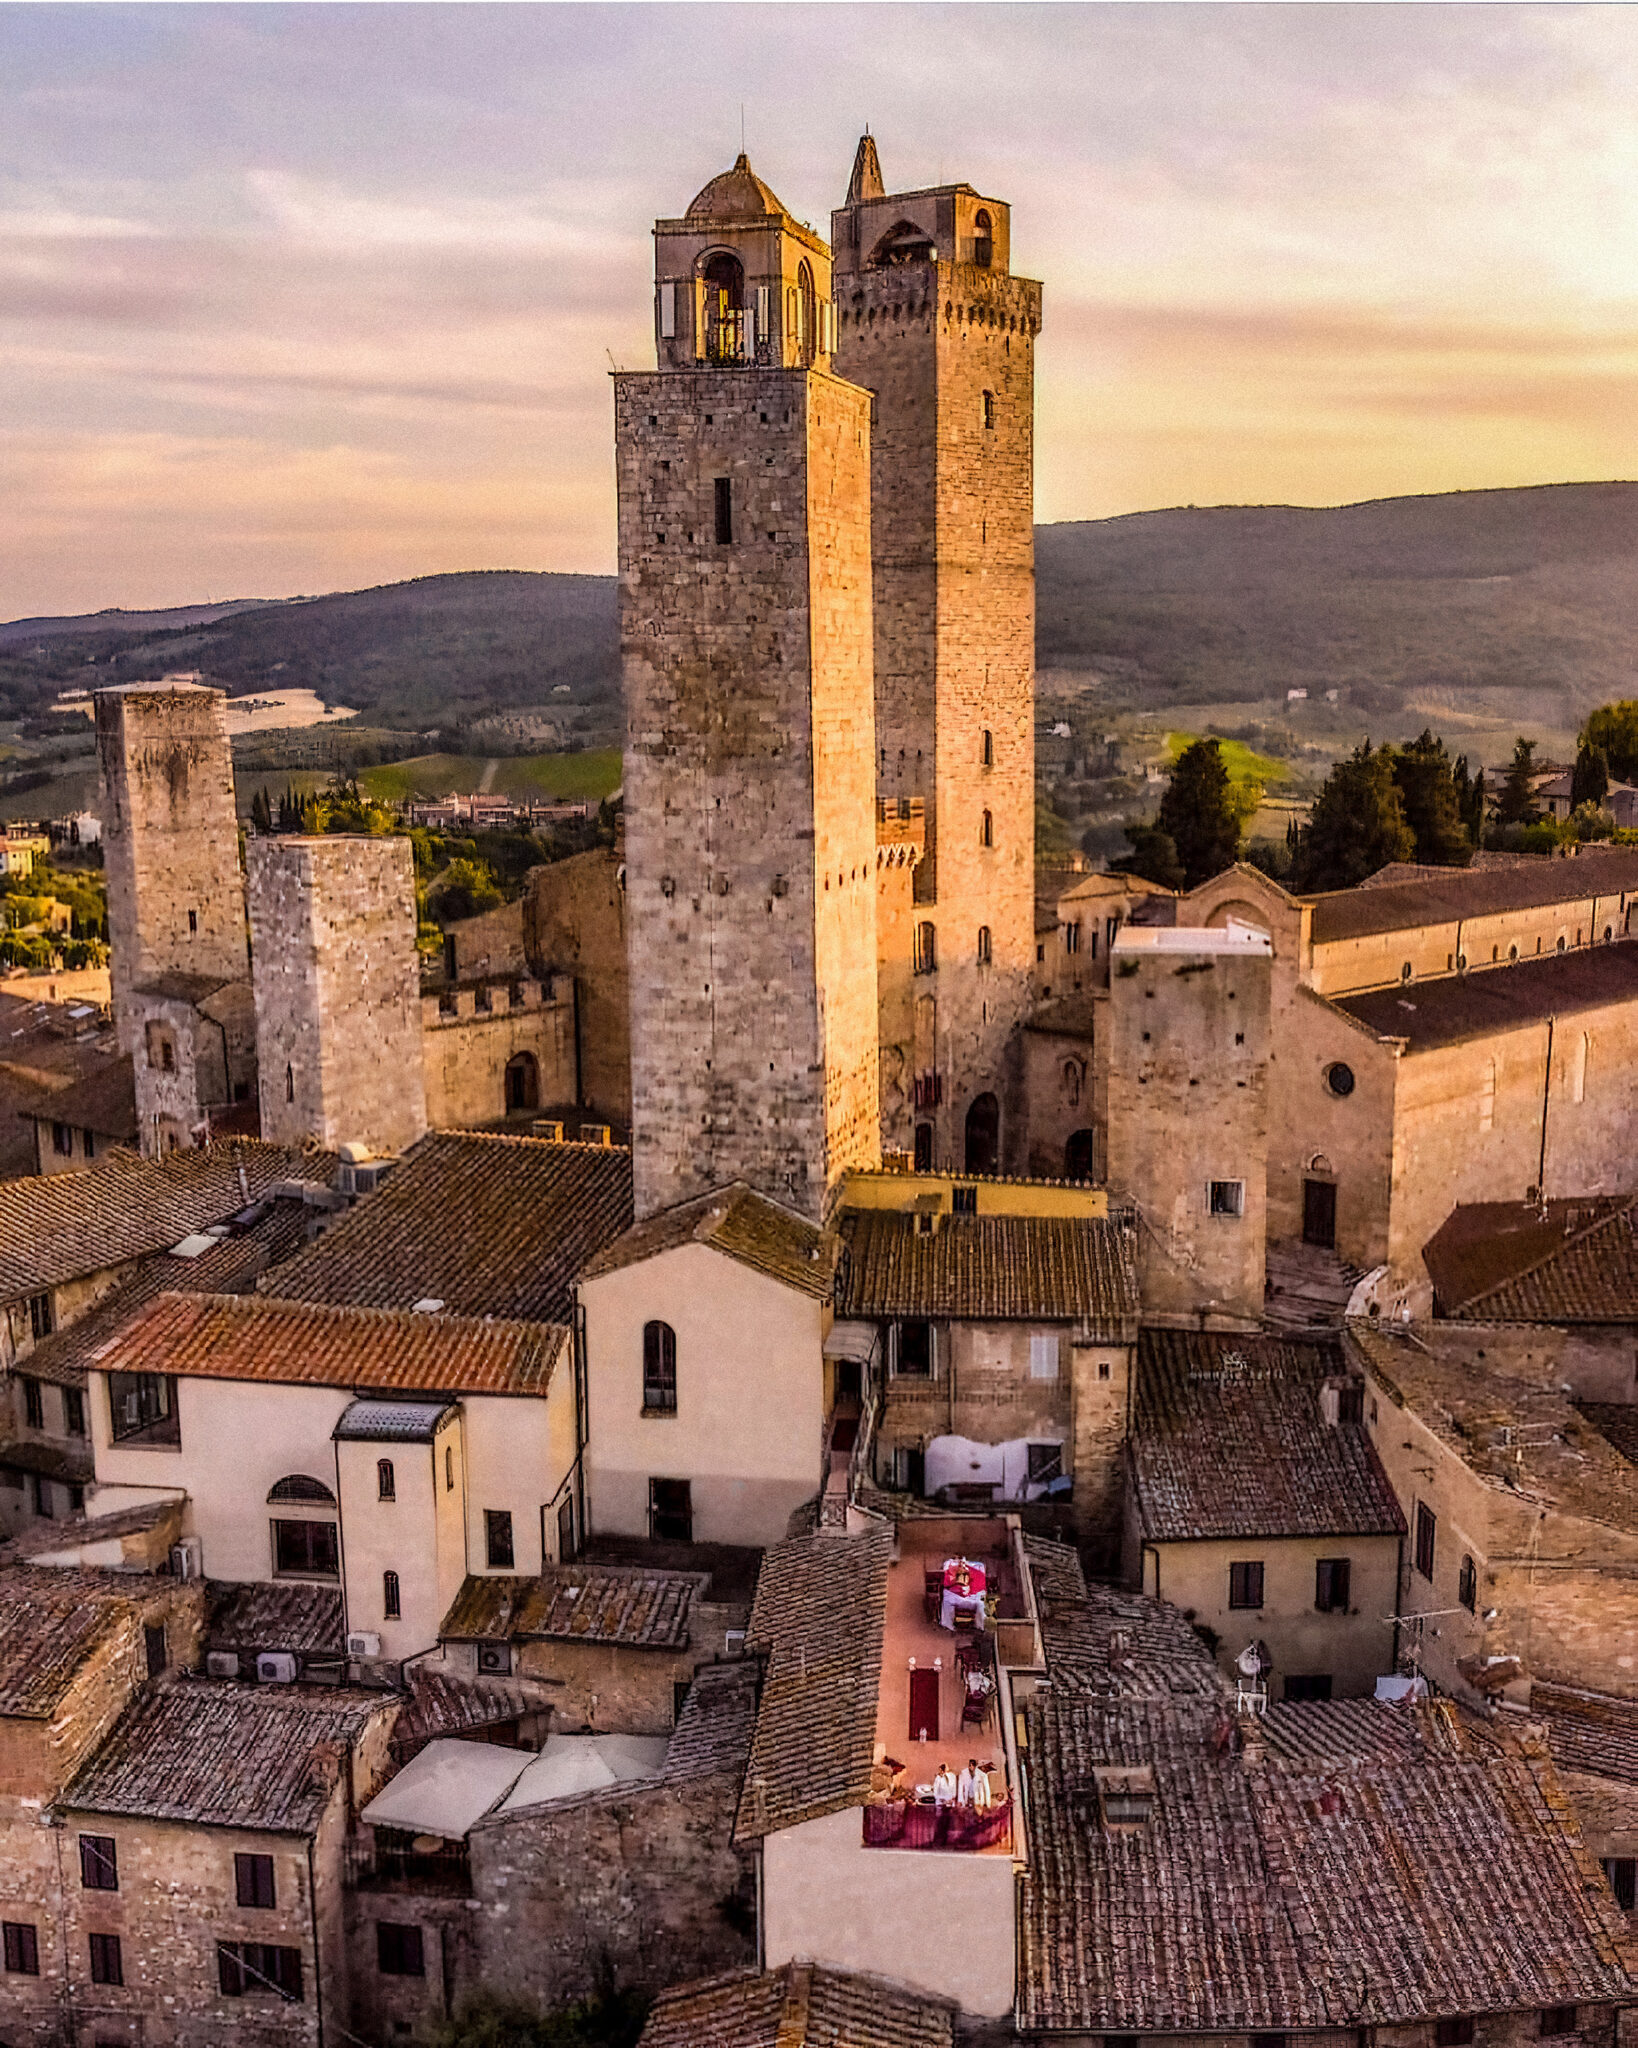 When of high-end Tuscan tourism may be rooted in the past.